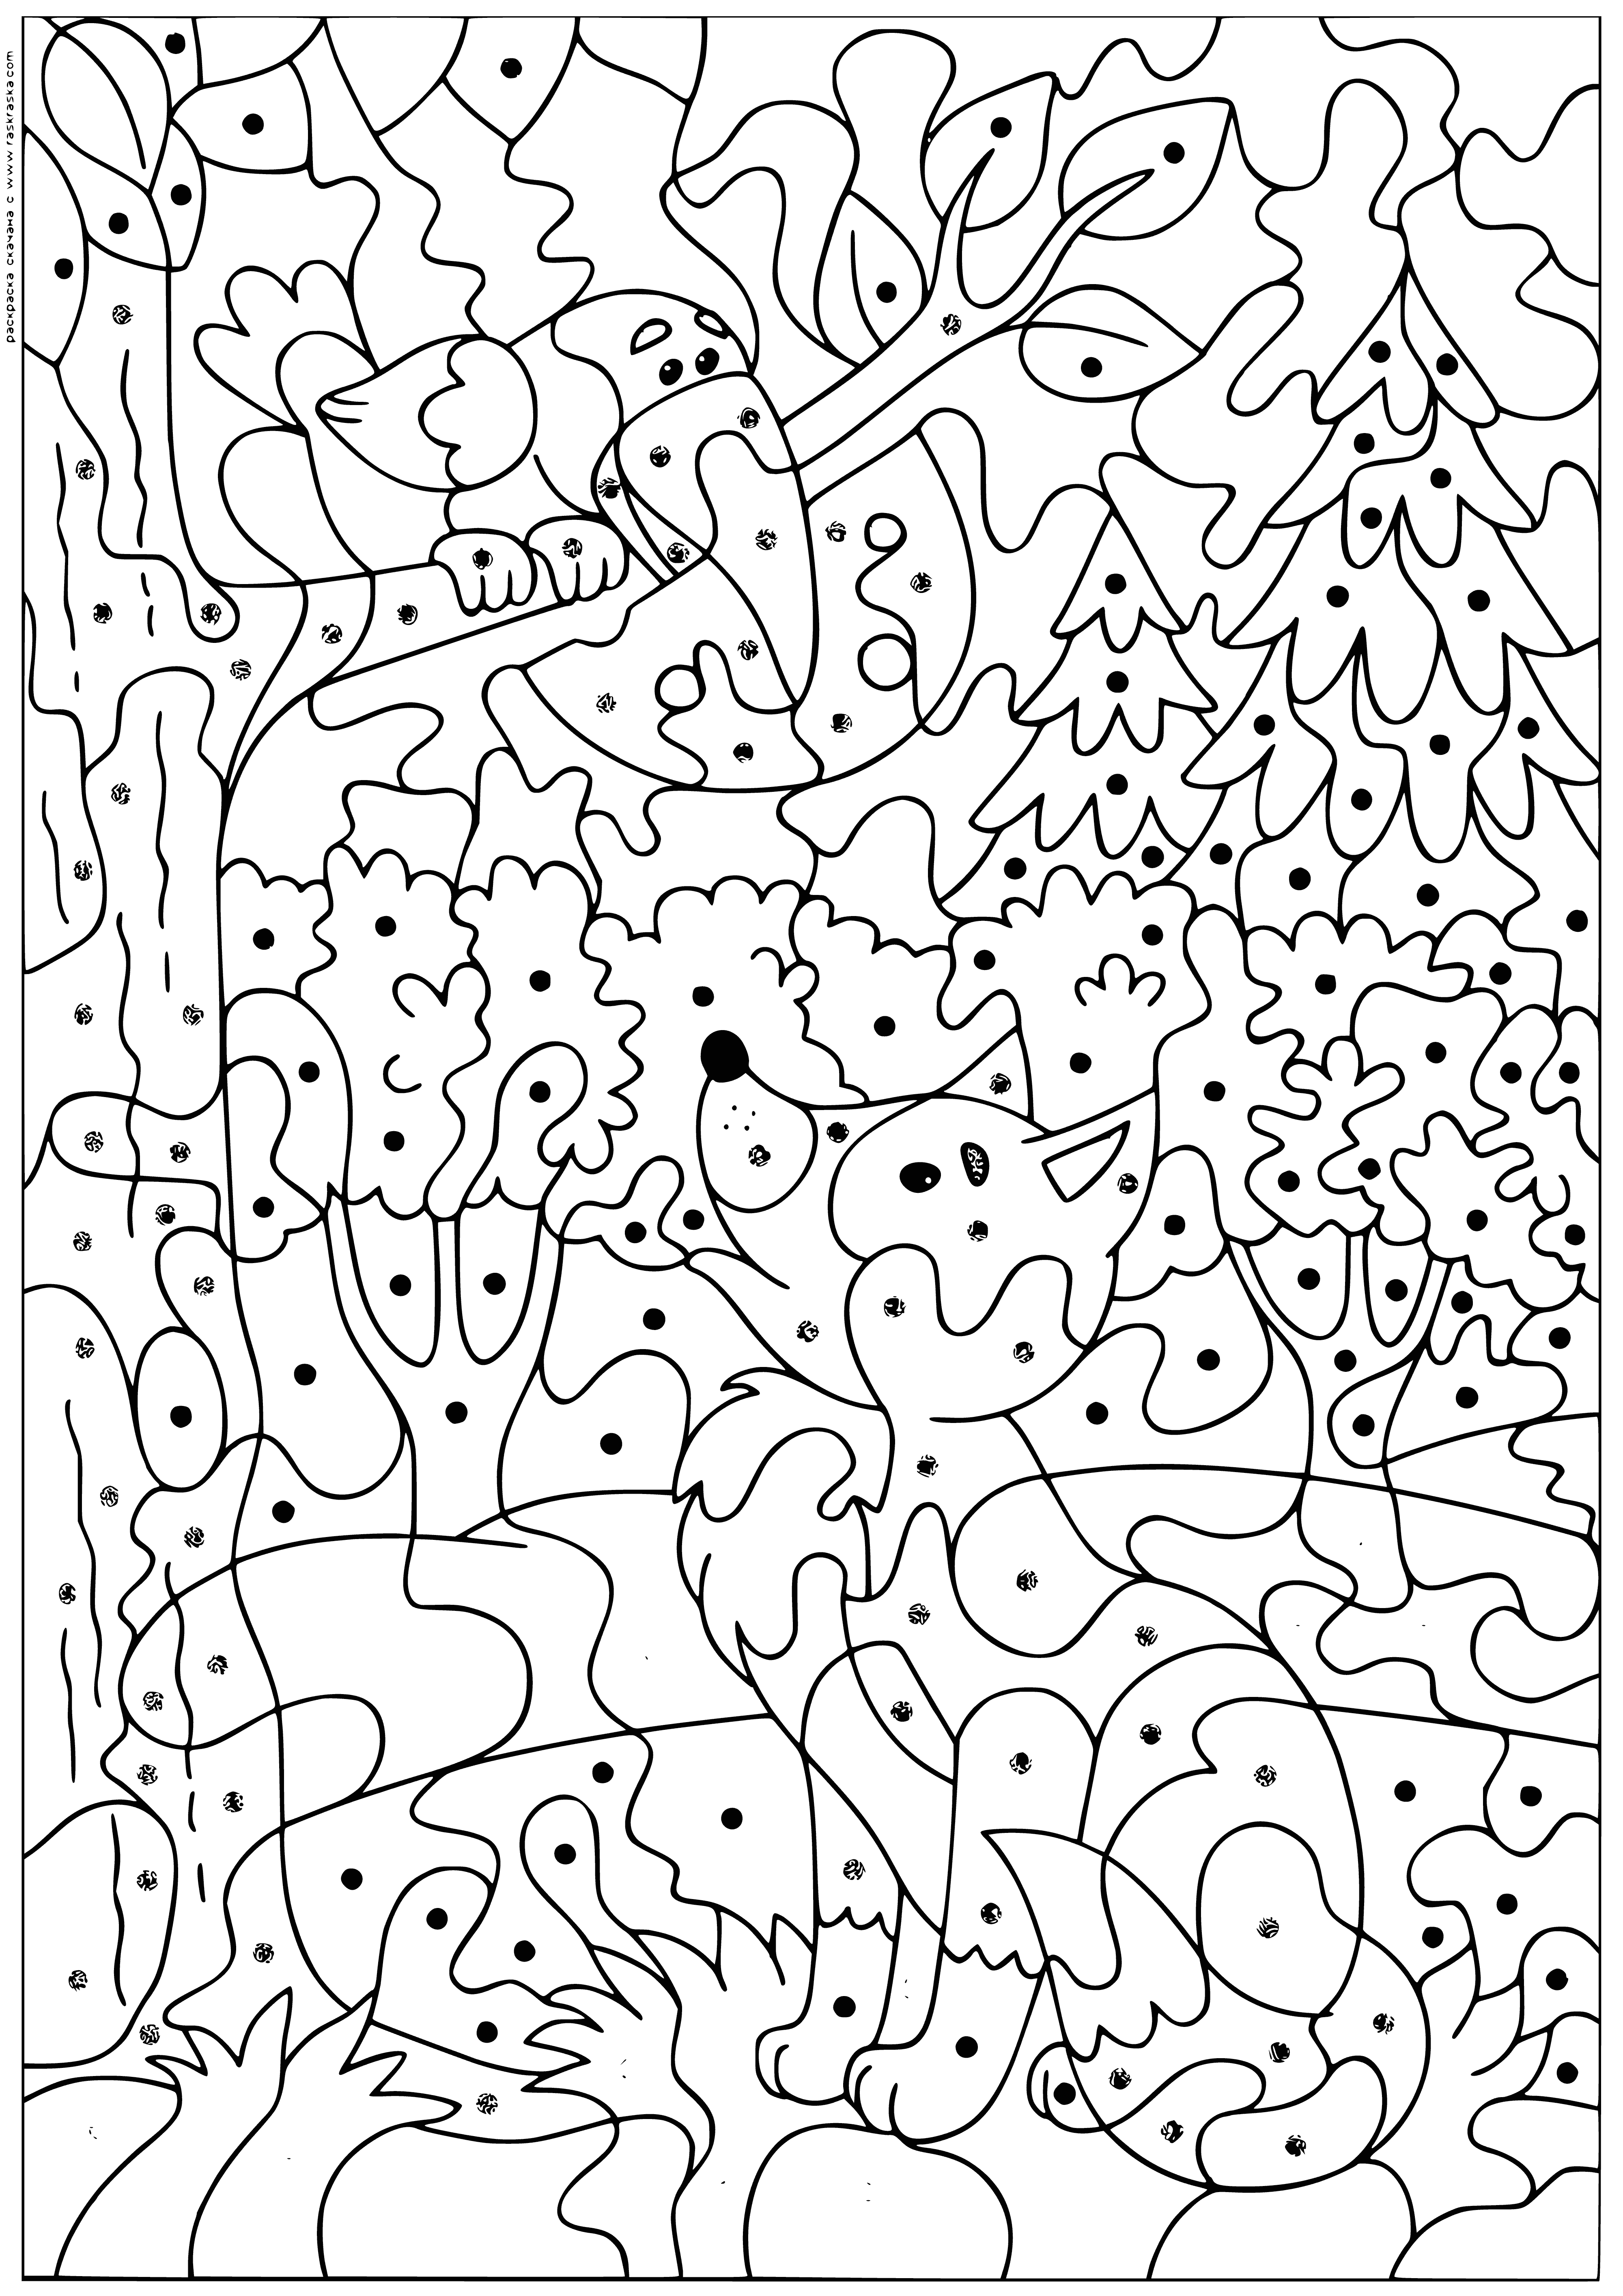 A Crow and a fox coloring page